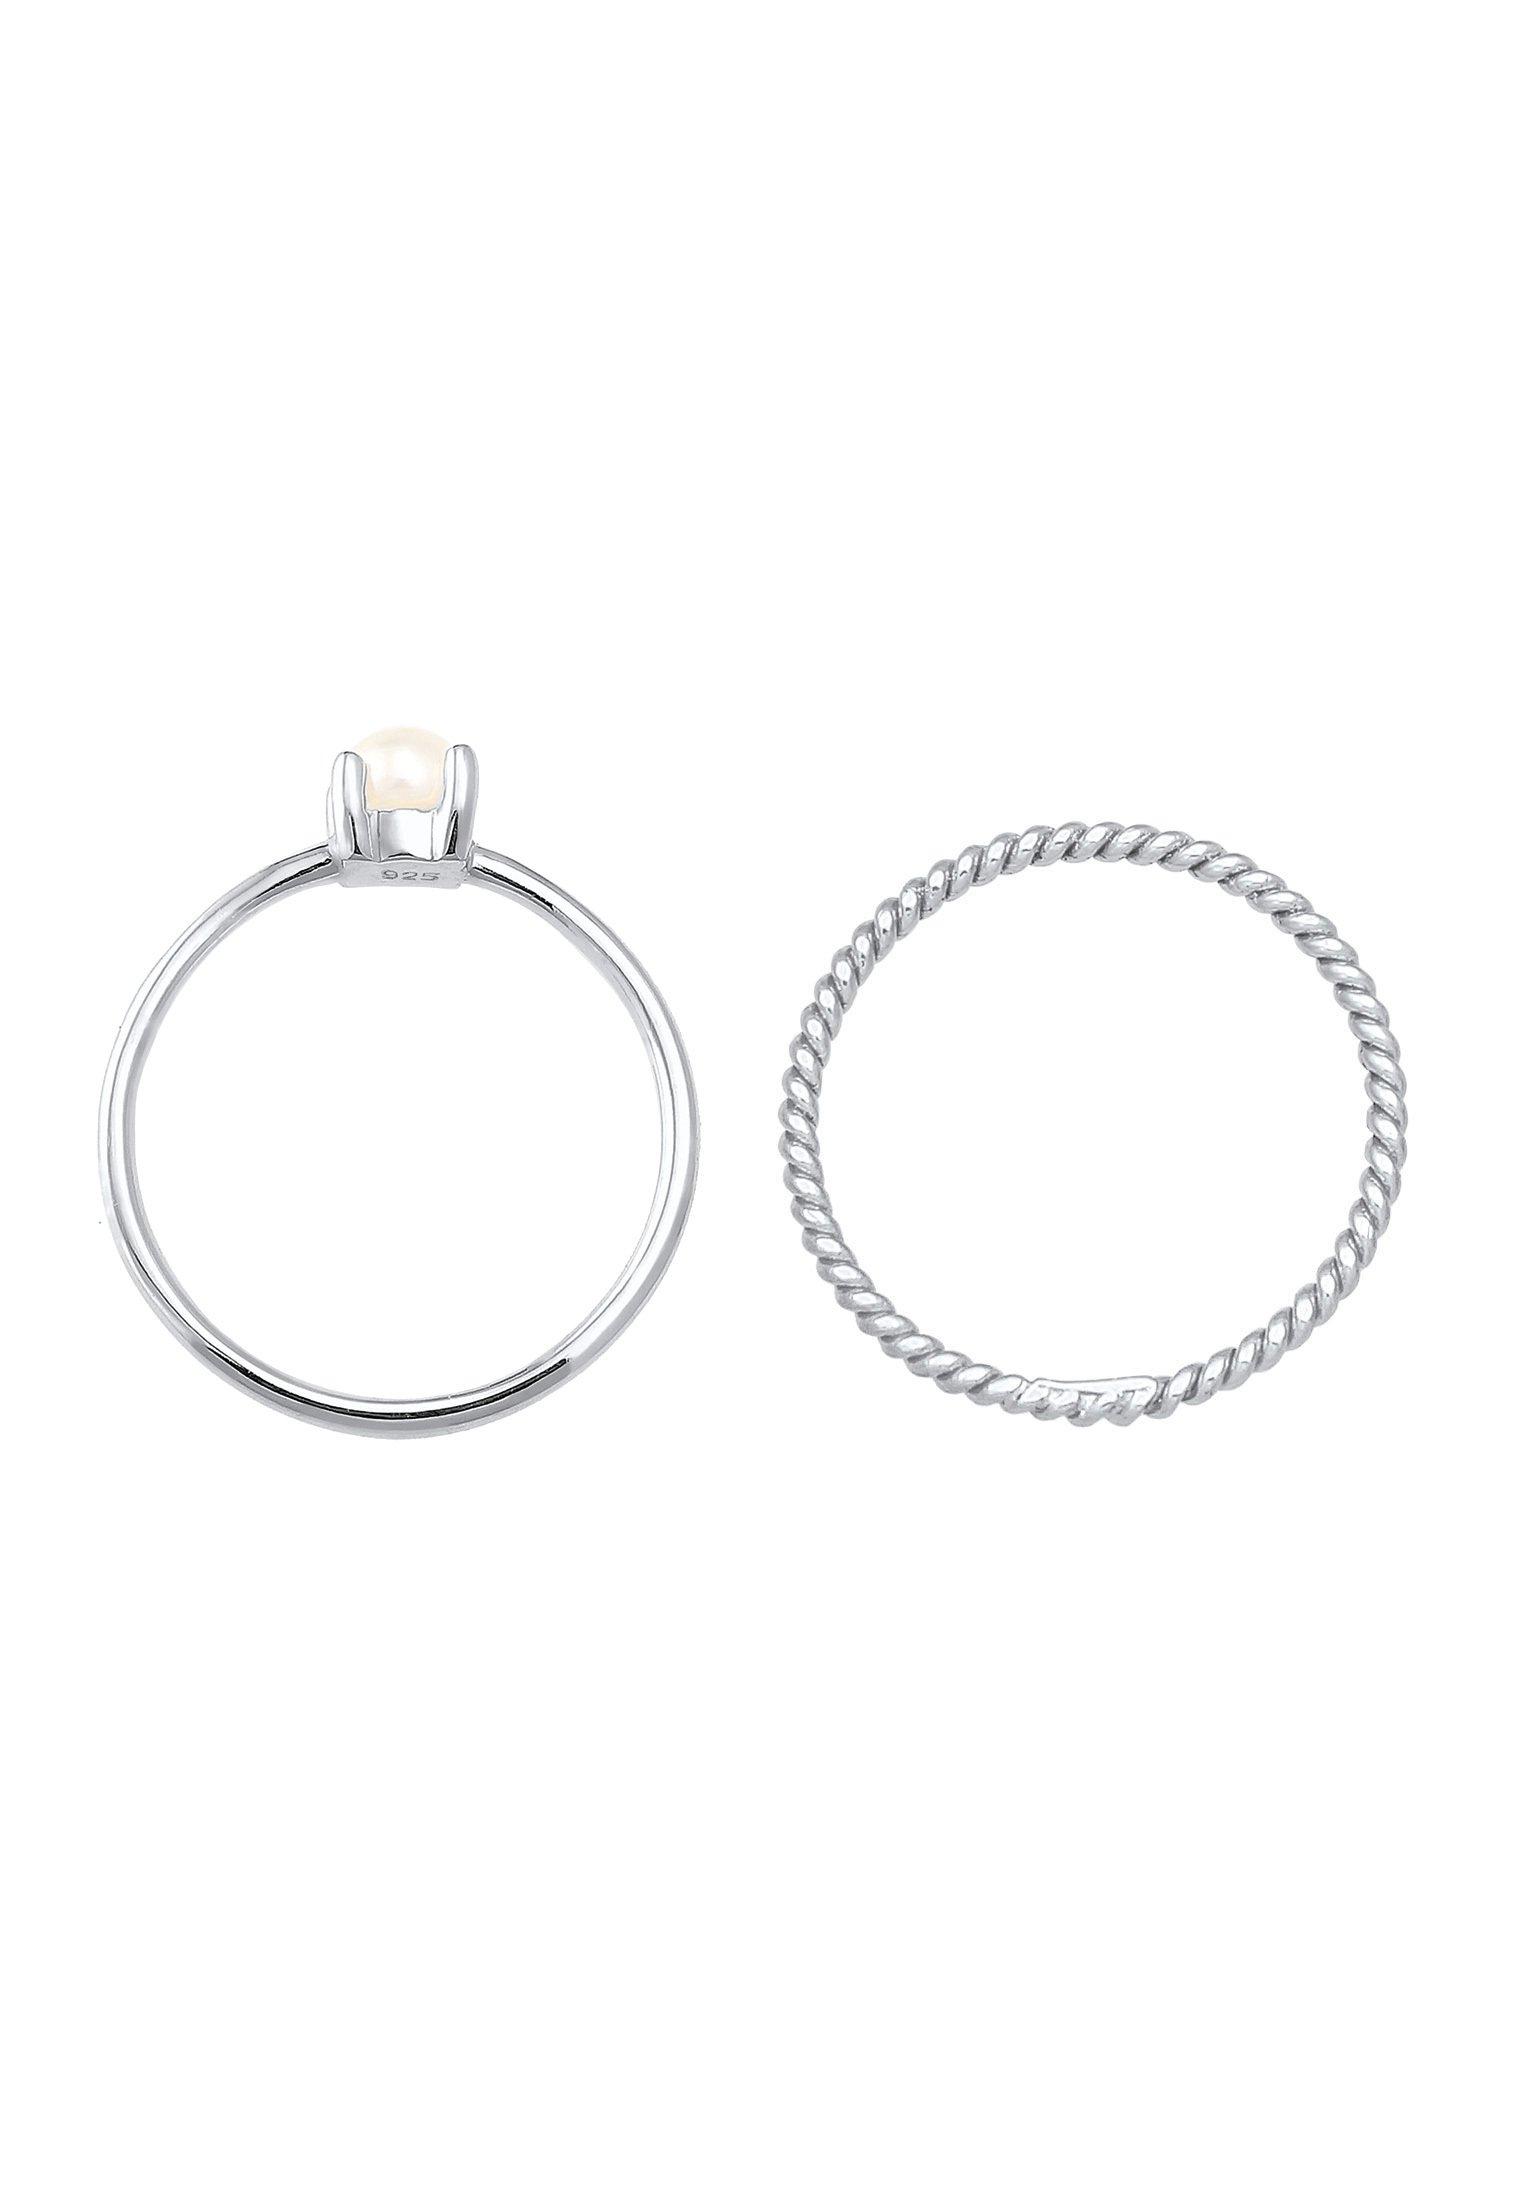 Elli  Ring Ring Set Perle Twisted 925 Silber 